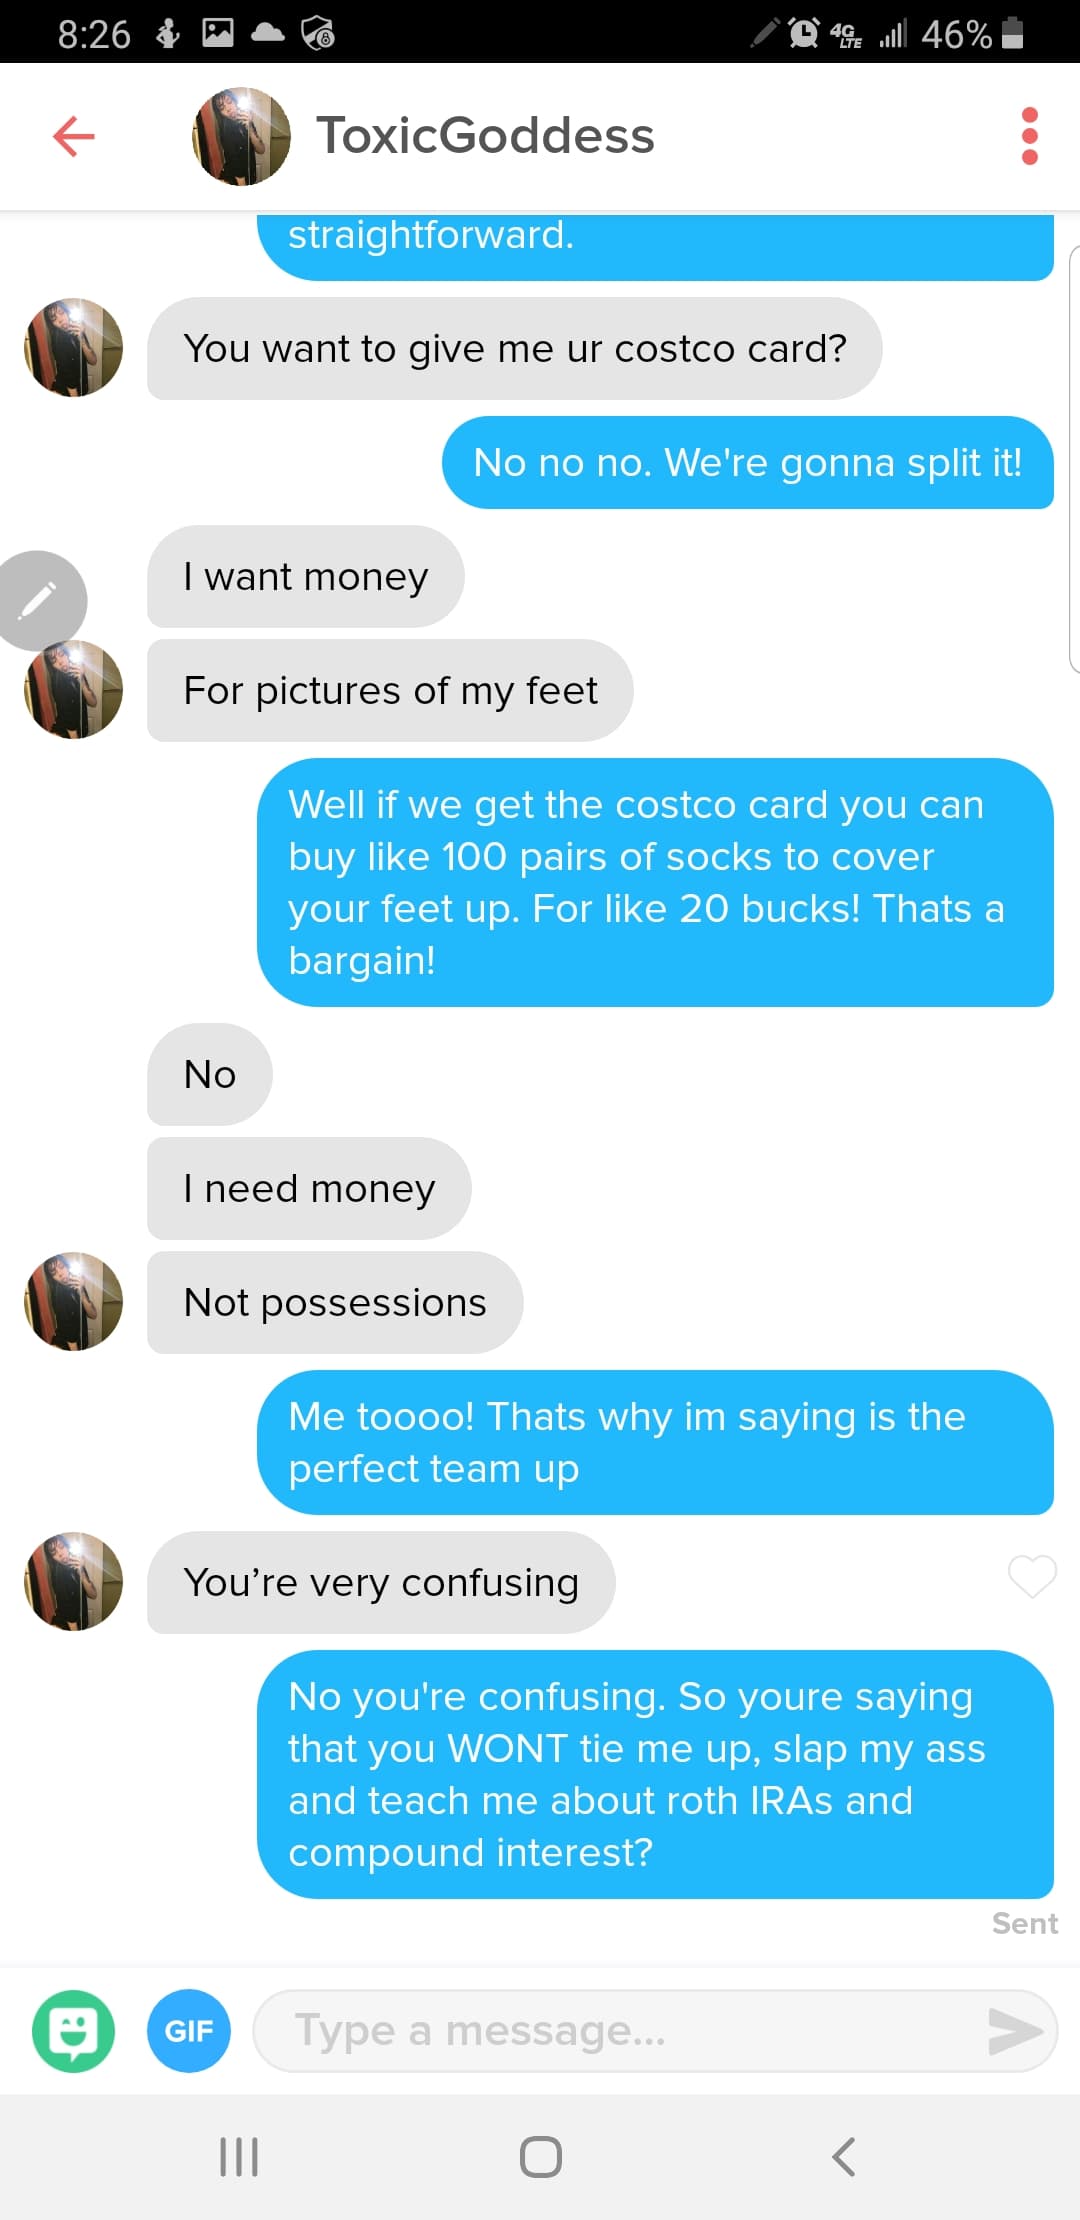 tinder gold digger - 44 will 46% f ToxicGoddess straightforward. You want to give me ur costco card? No no no. We're gonna split it! I want money For pictures of my feet Well if we get the costco card you can buy 100 pairs of socks to cover your feet up. 